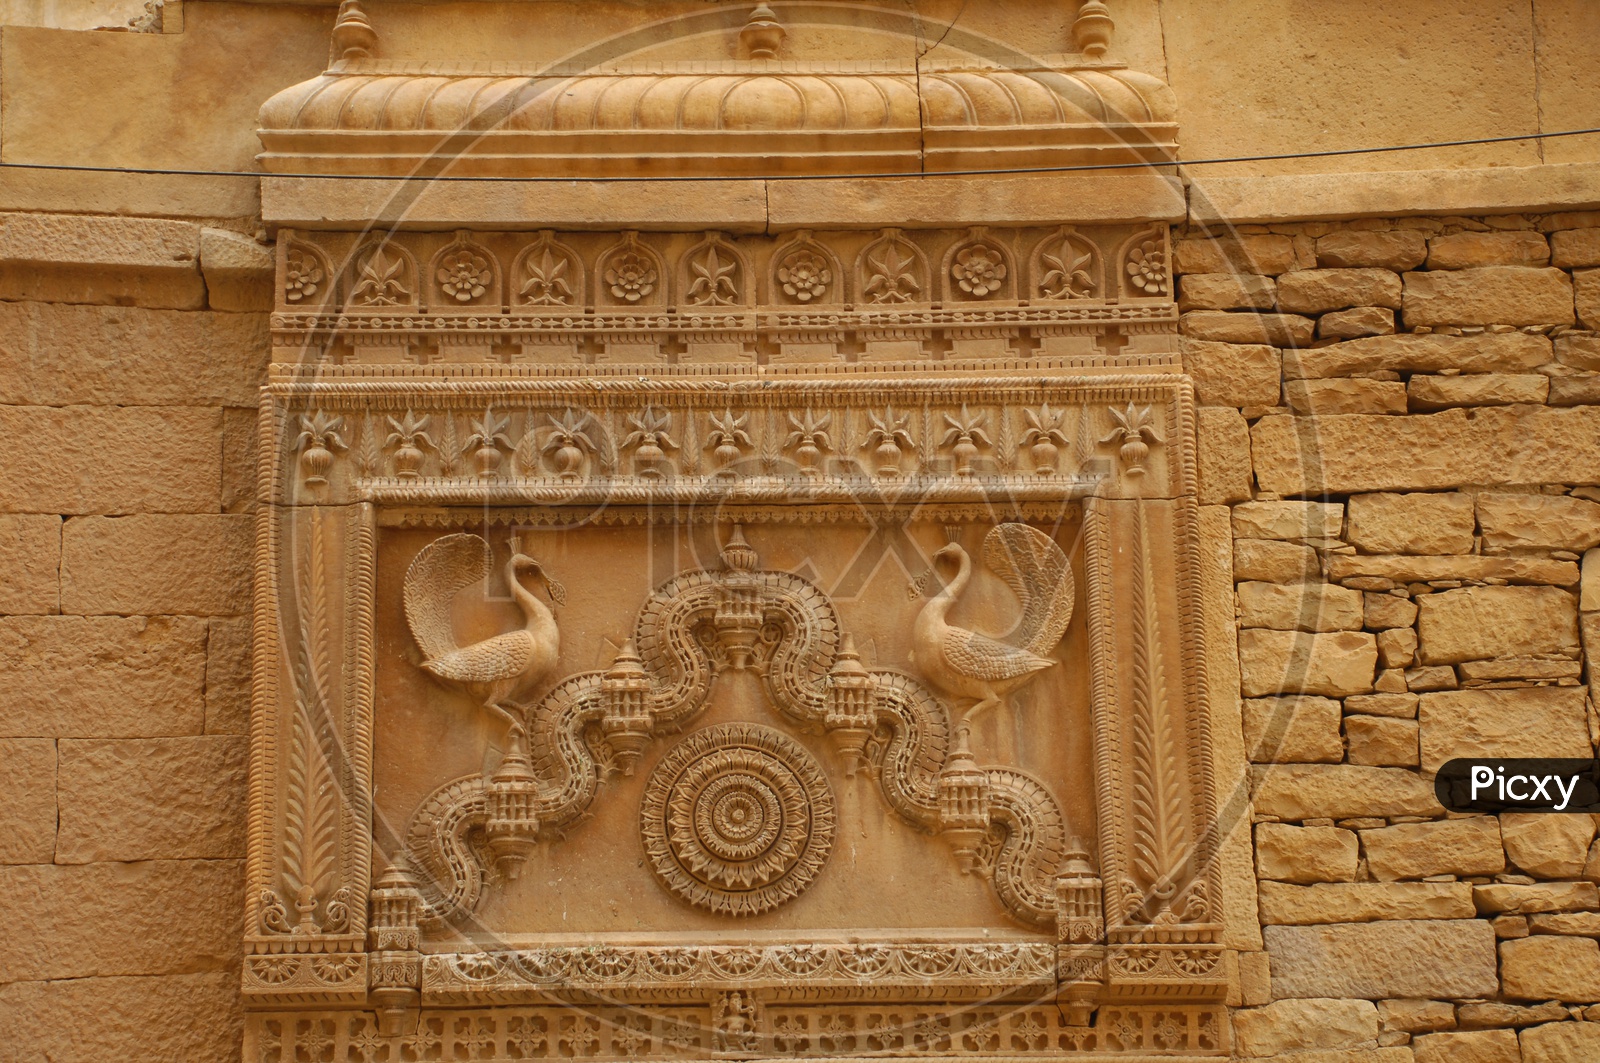 Architecture of a temple wall